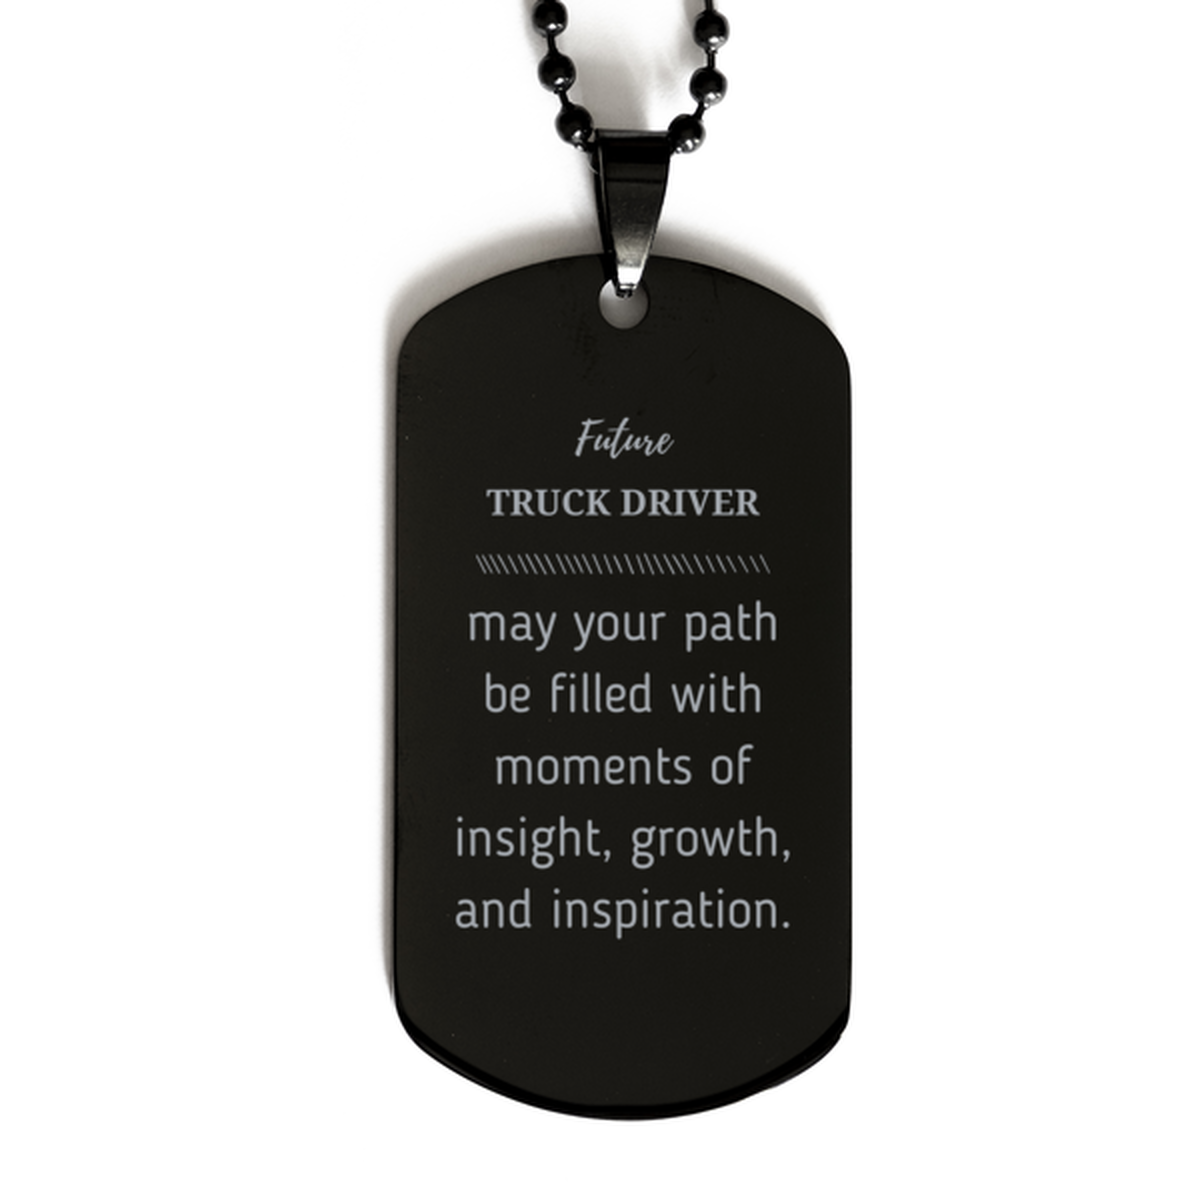 Future Truck Driver Gifts, May your path be filled with moments of insight, Graduation Gifts for New Truck Driver, Christmas Unique Black Dog Tag For Men, Women, Friends